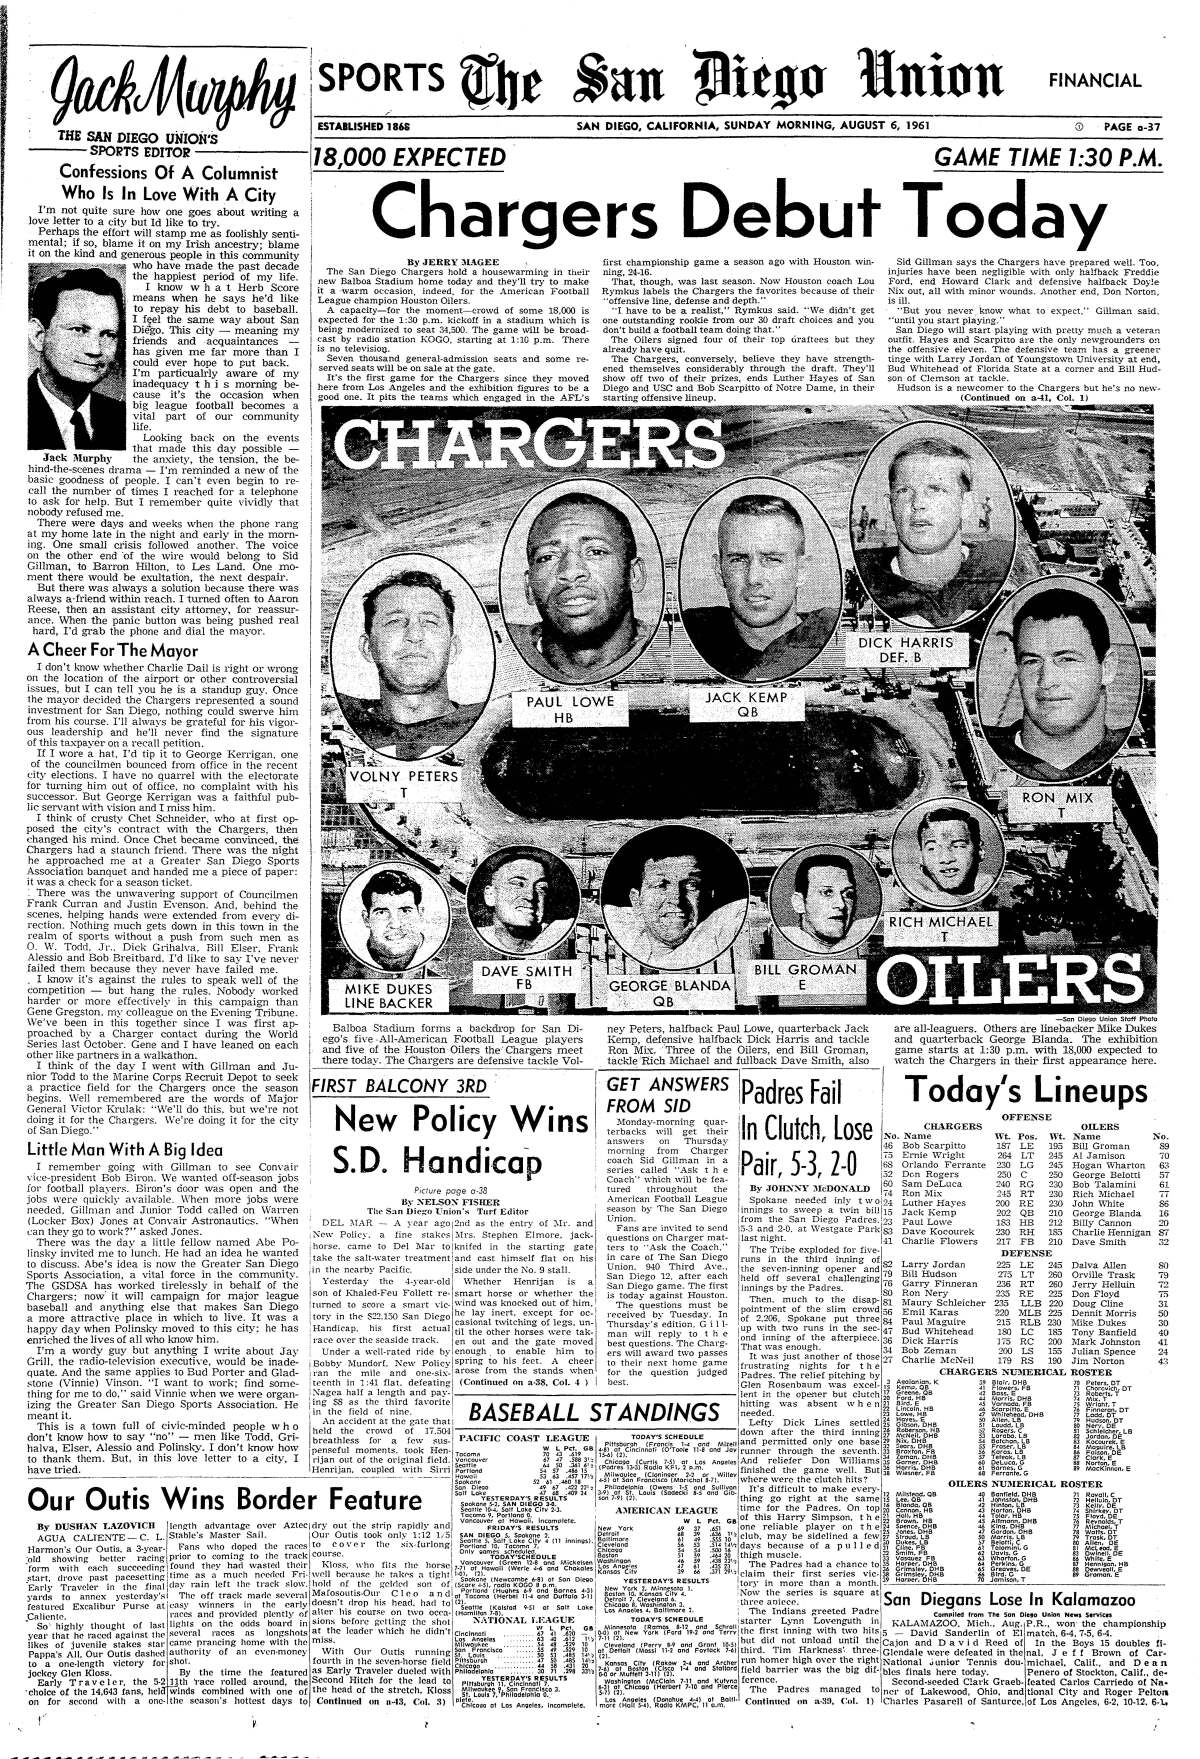 1961 AFL Championship Houston Oilers at San Diego Chargers